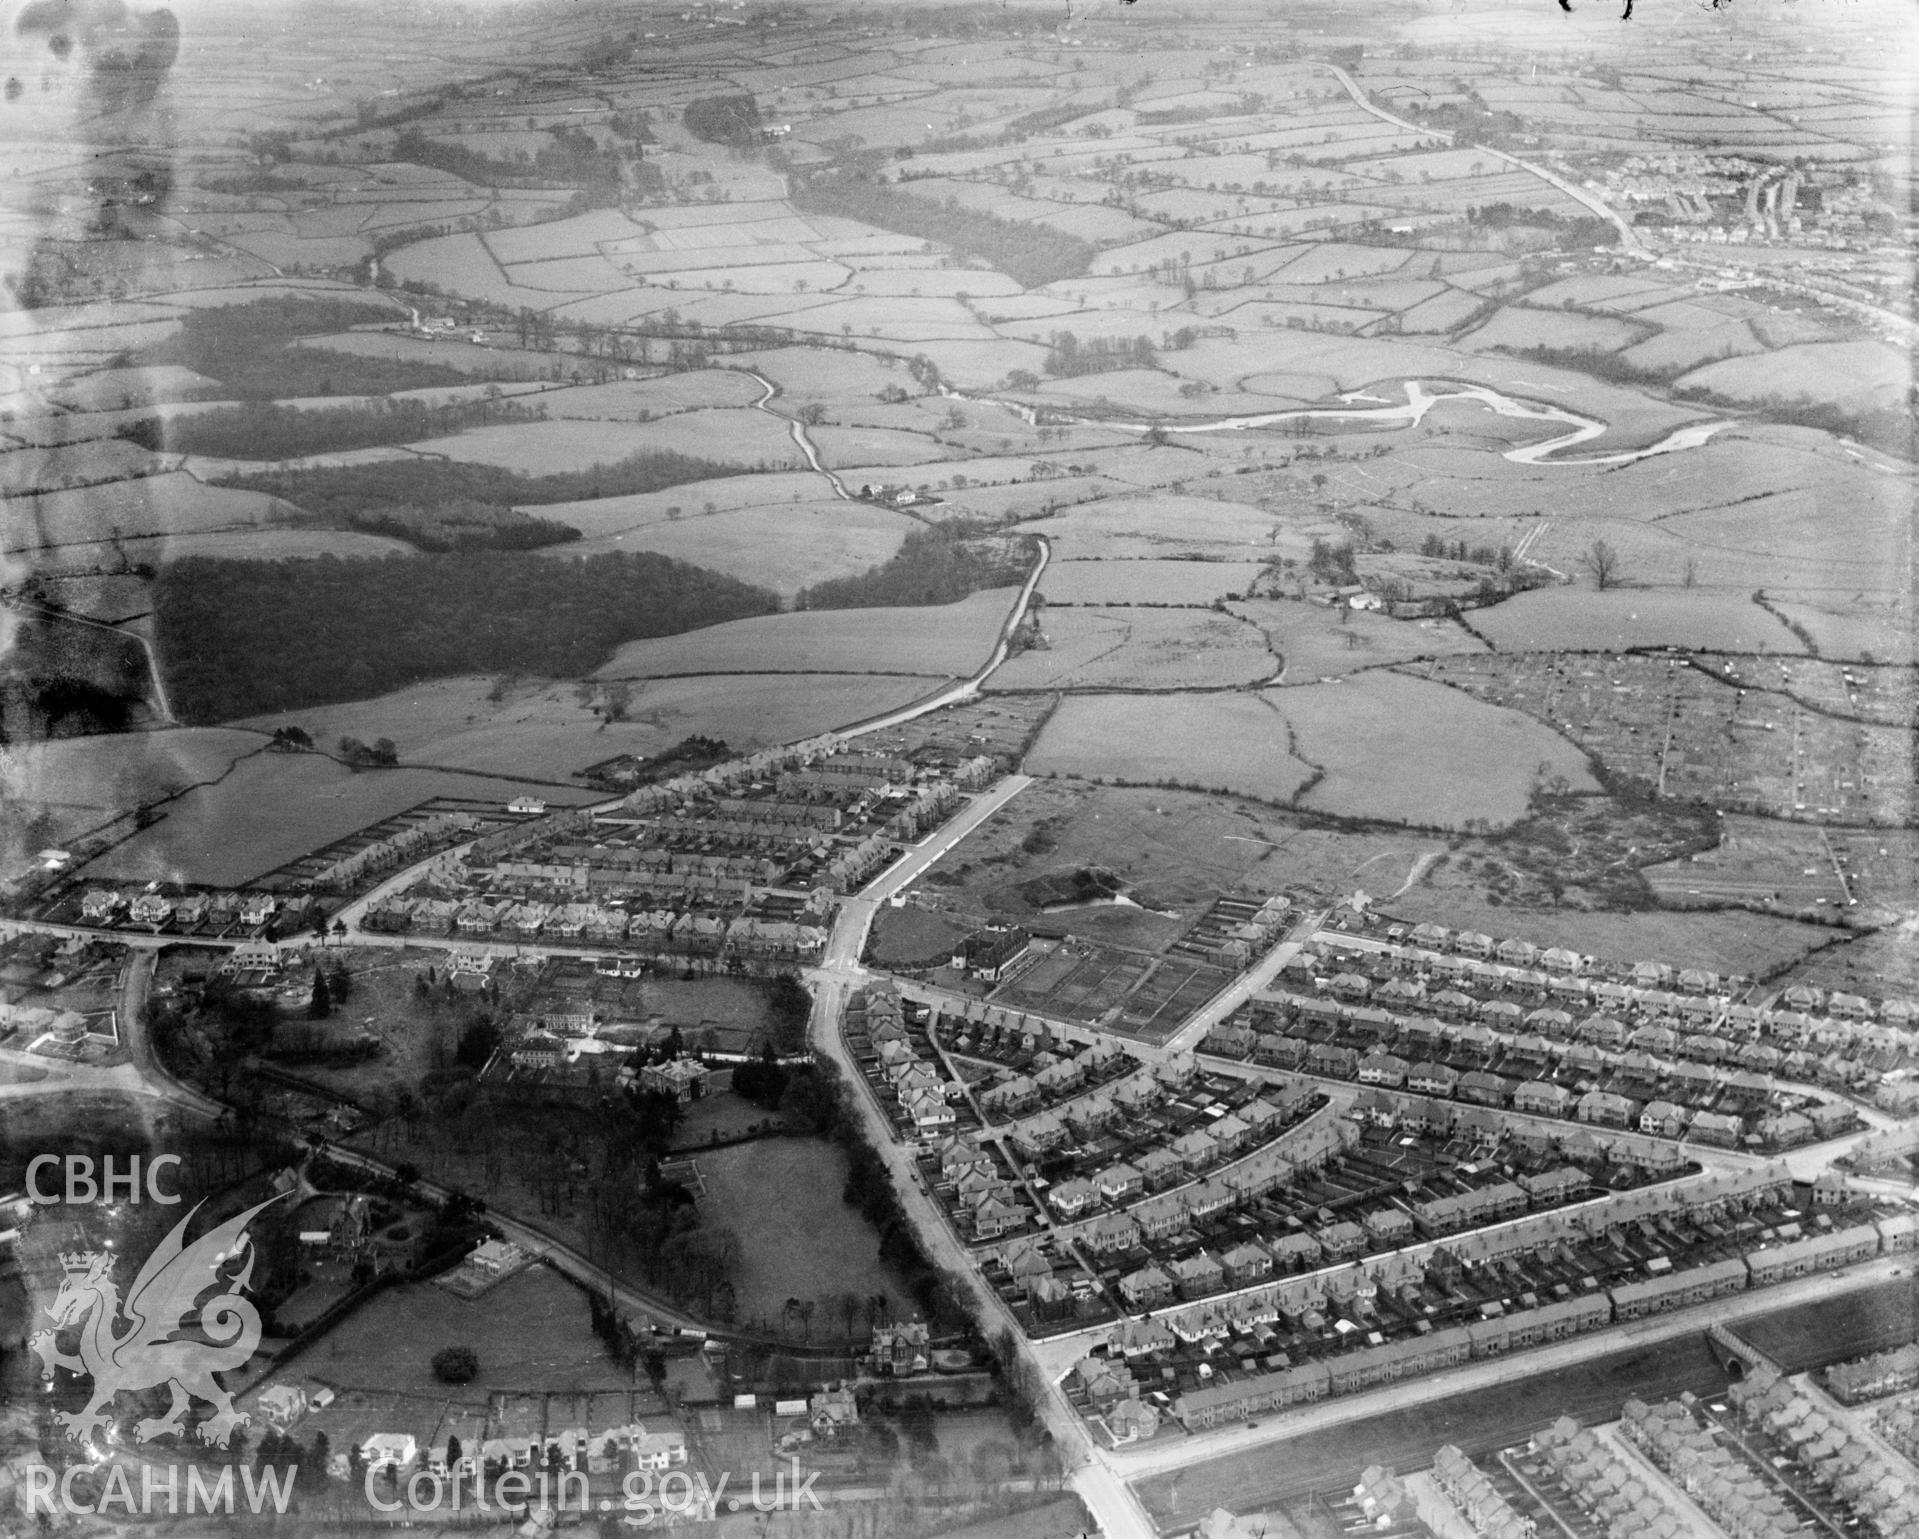 View of Cardiff showing Tremorfa housing estate, oblique aerial view. 5?x4? black and white glass plate negative.